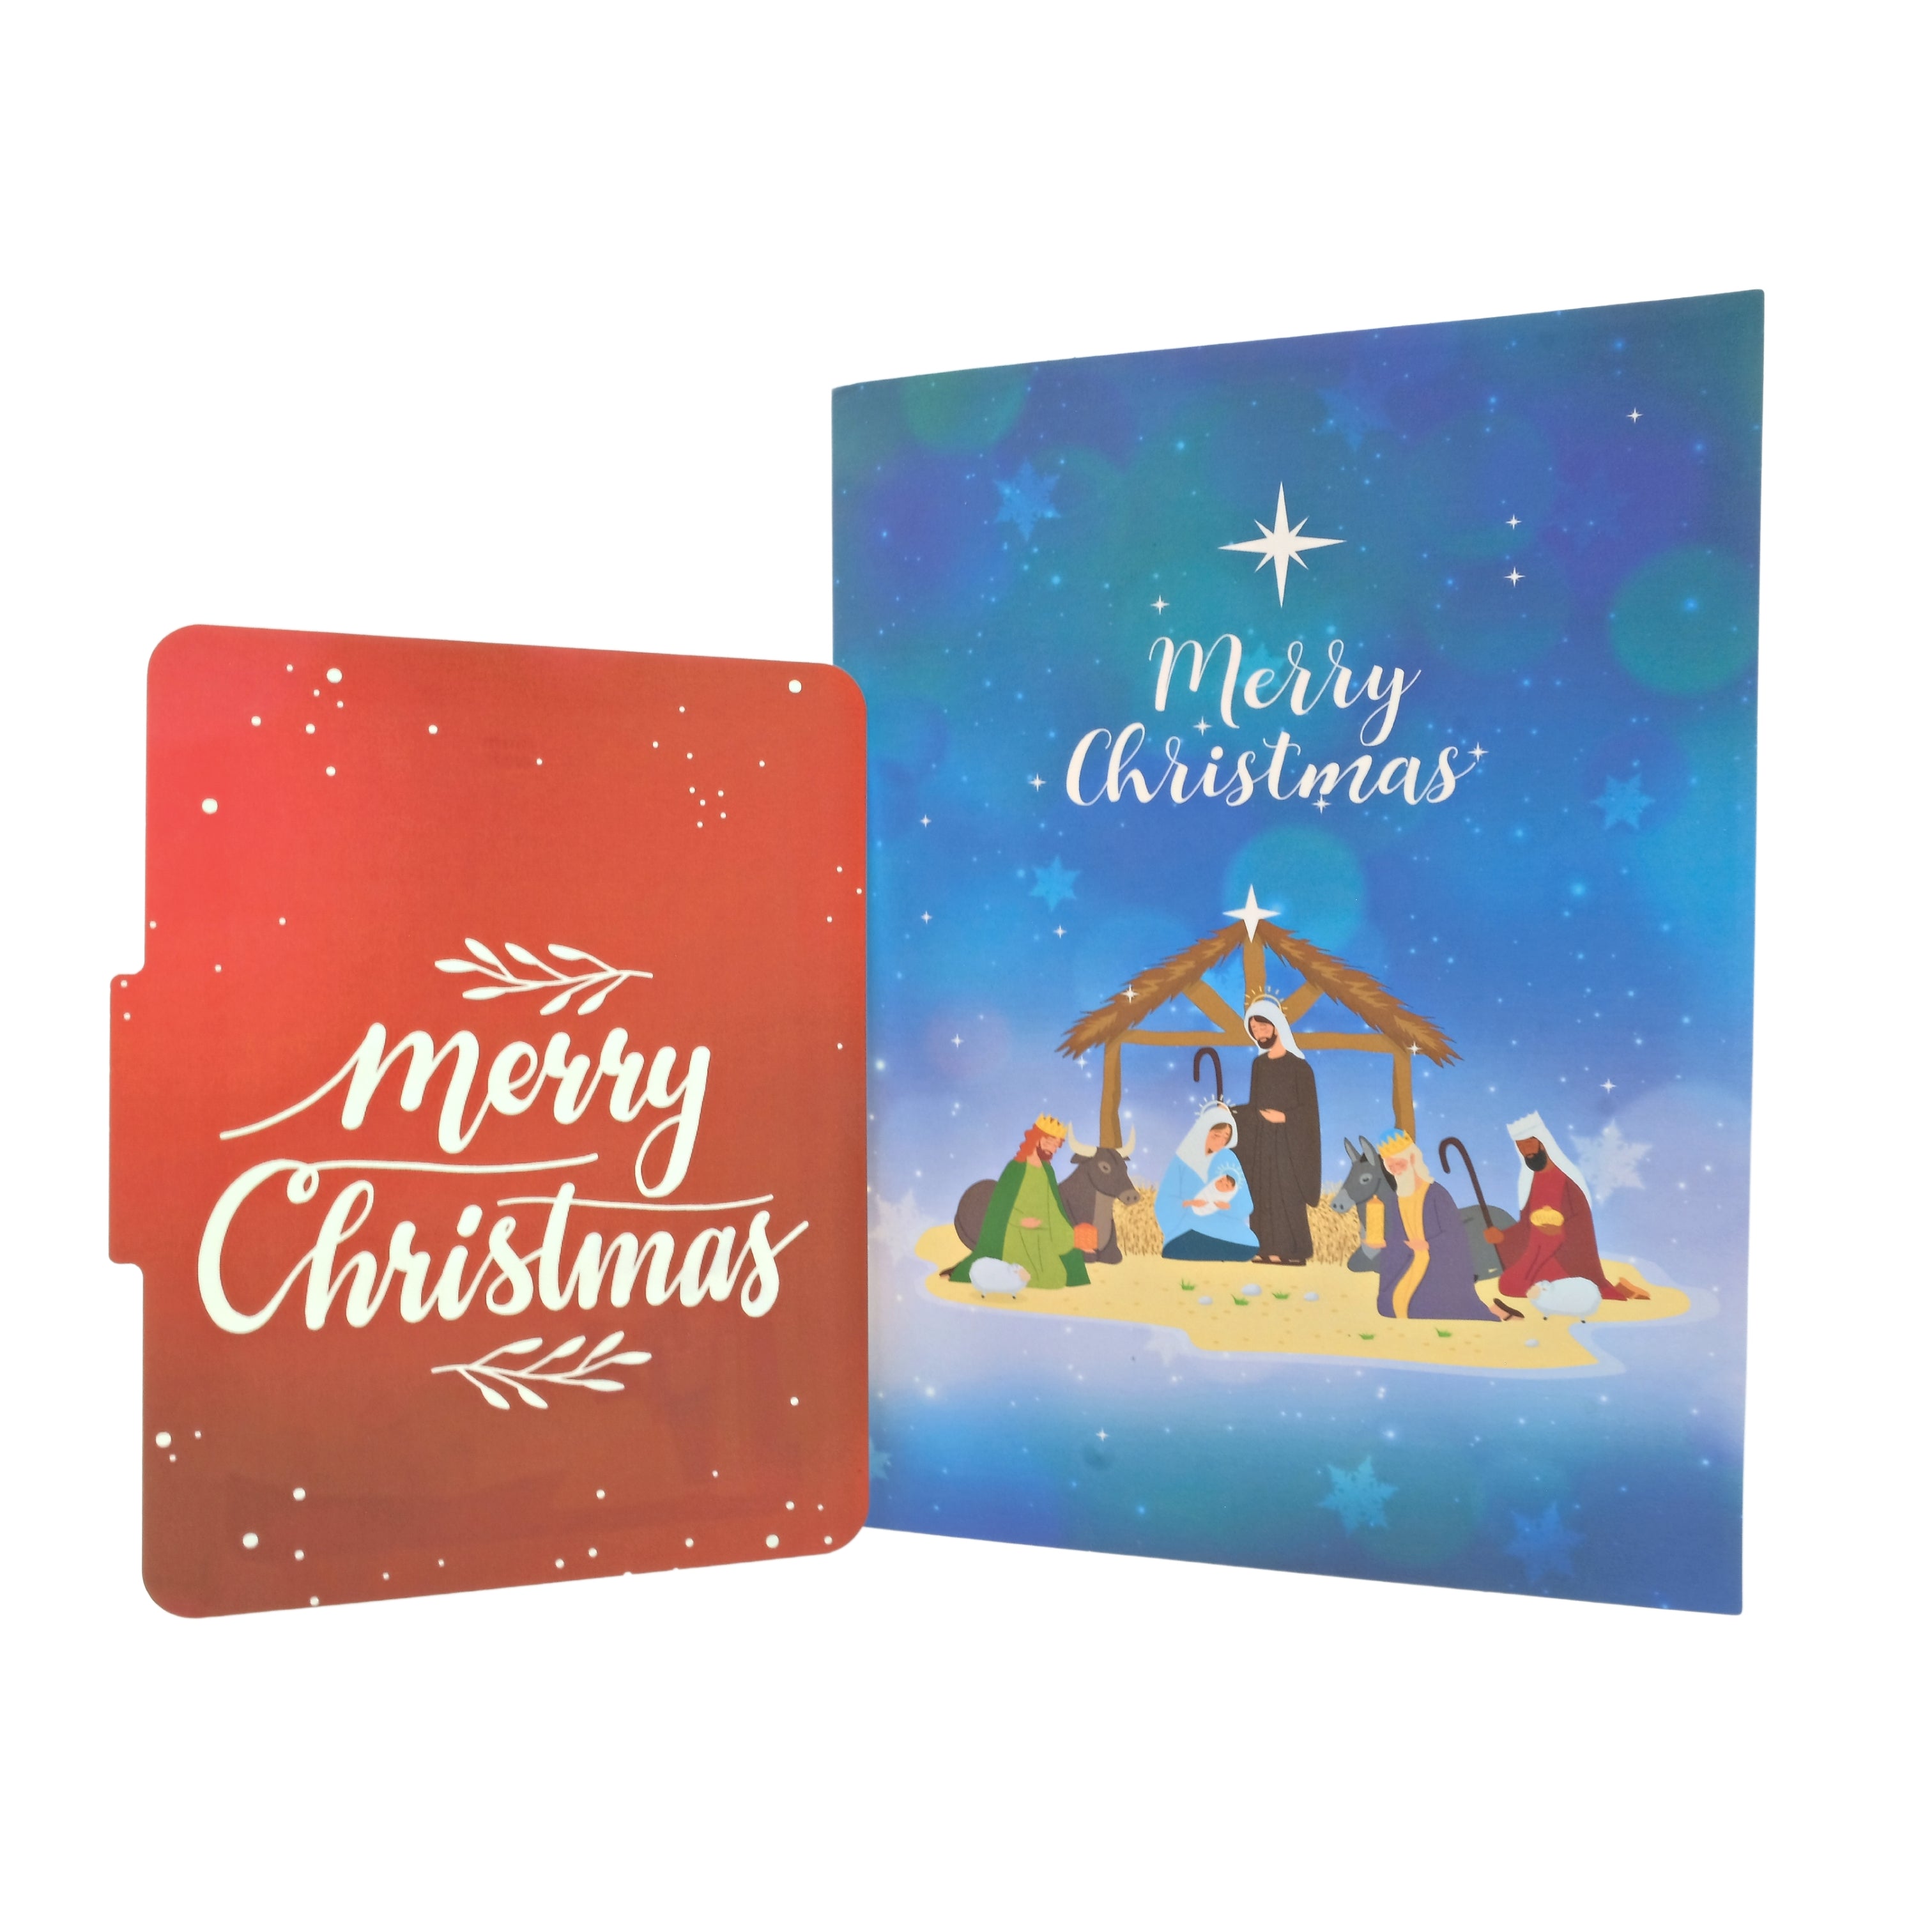 Pop Up Greeting Card Merry Christmas Jesus Christ's birth Holy Night Nativity Scene Decoration Christmas Gift Idea Holiday Card For Family